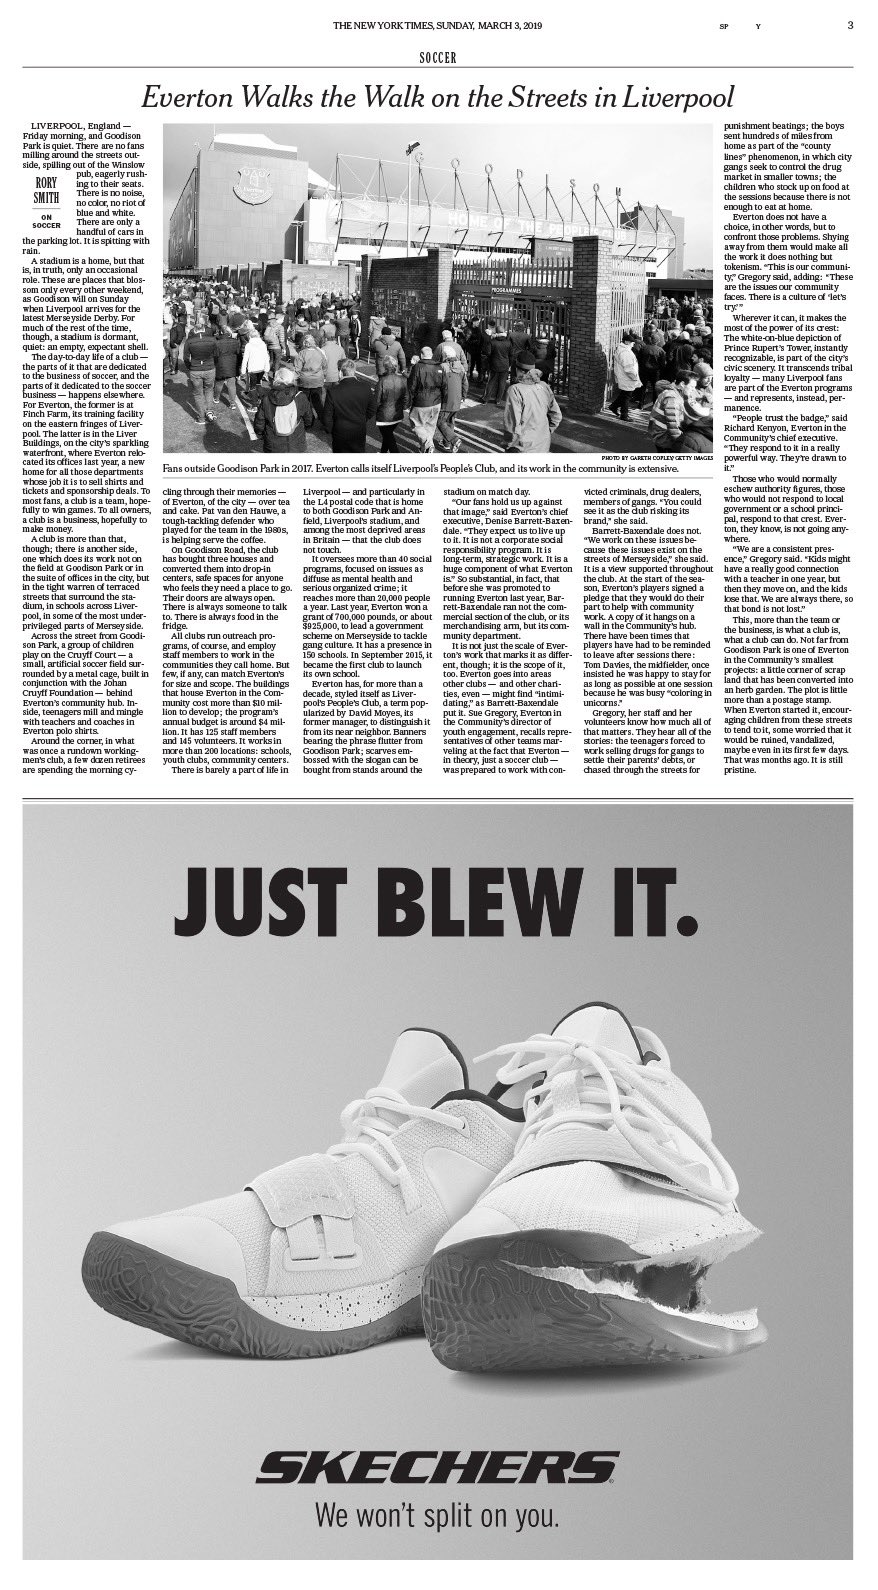 Skechers 'Just Blew It' ad in The New York Times